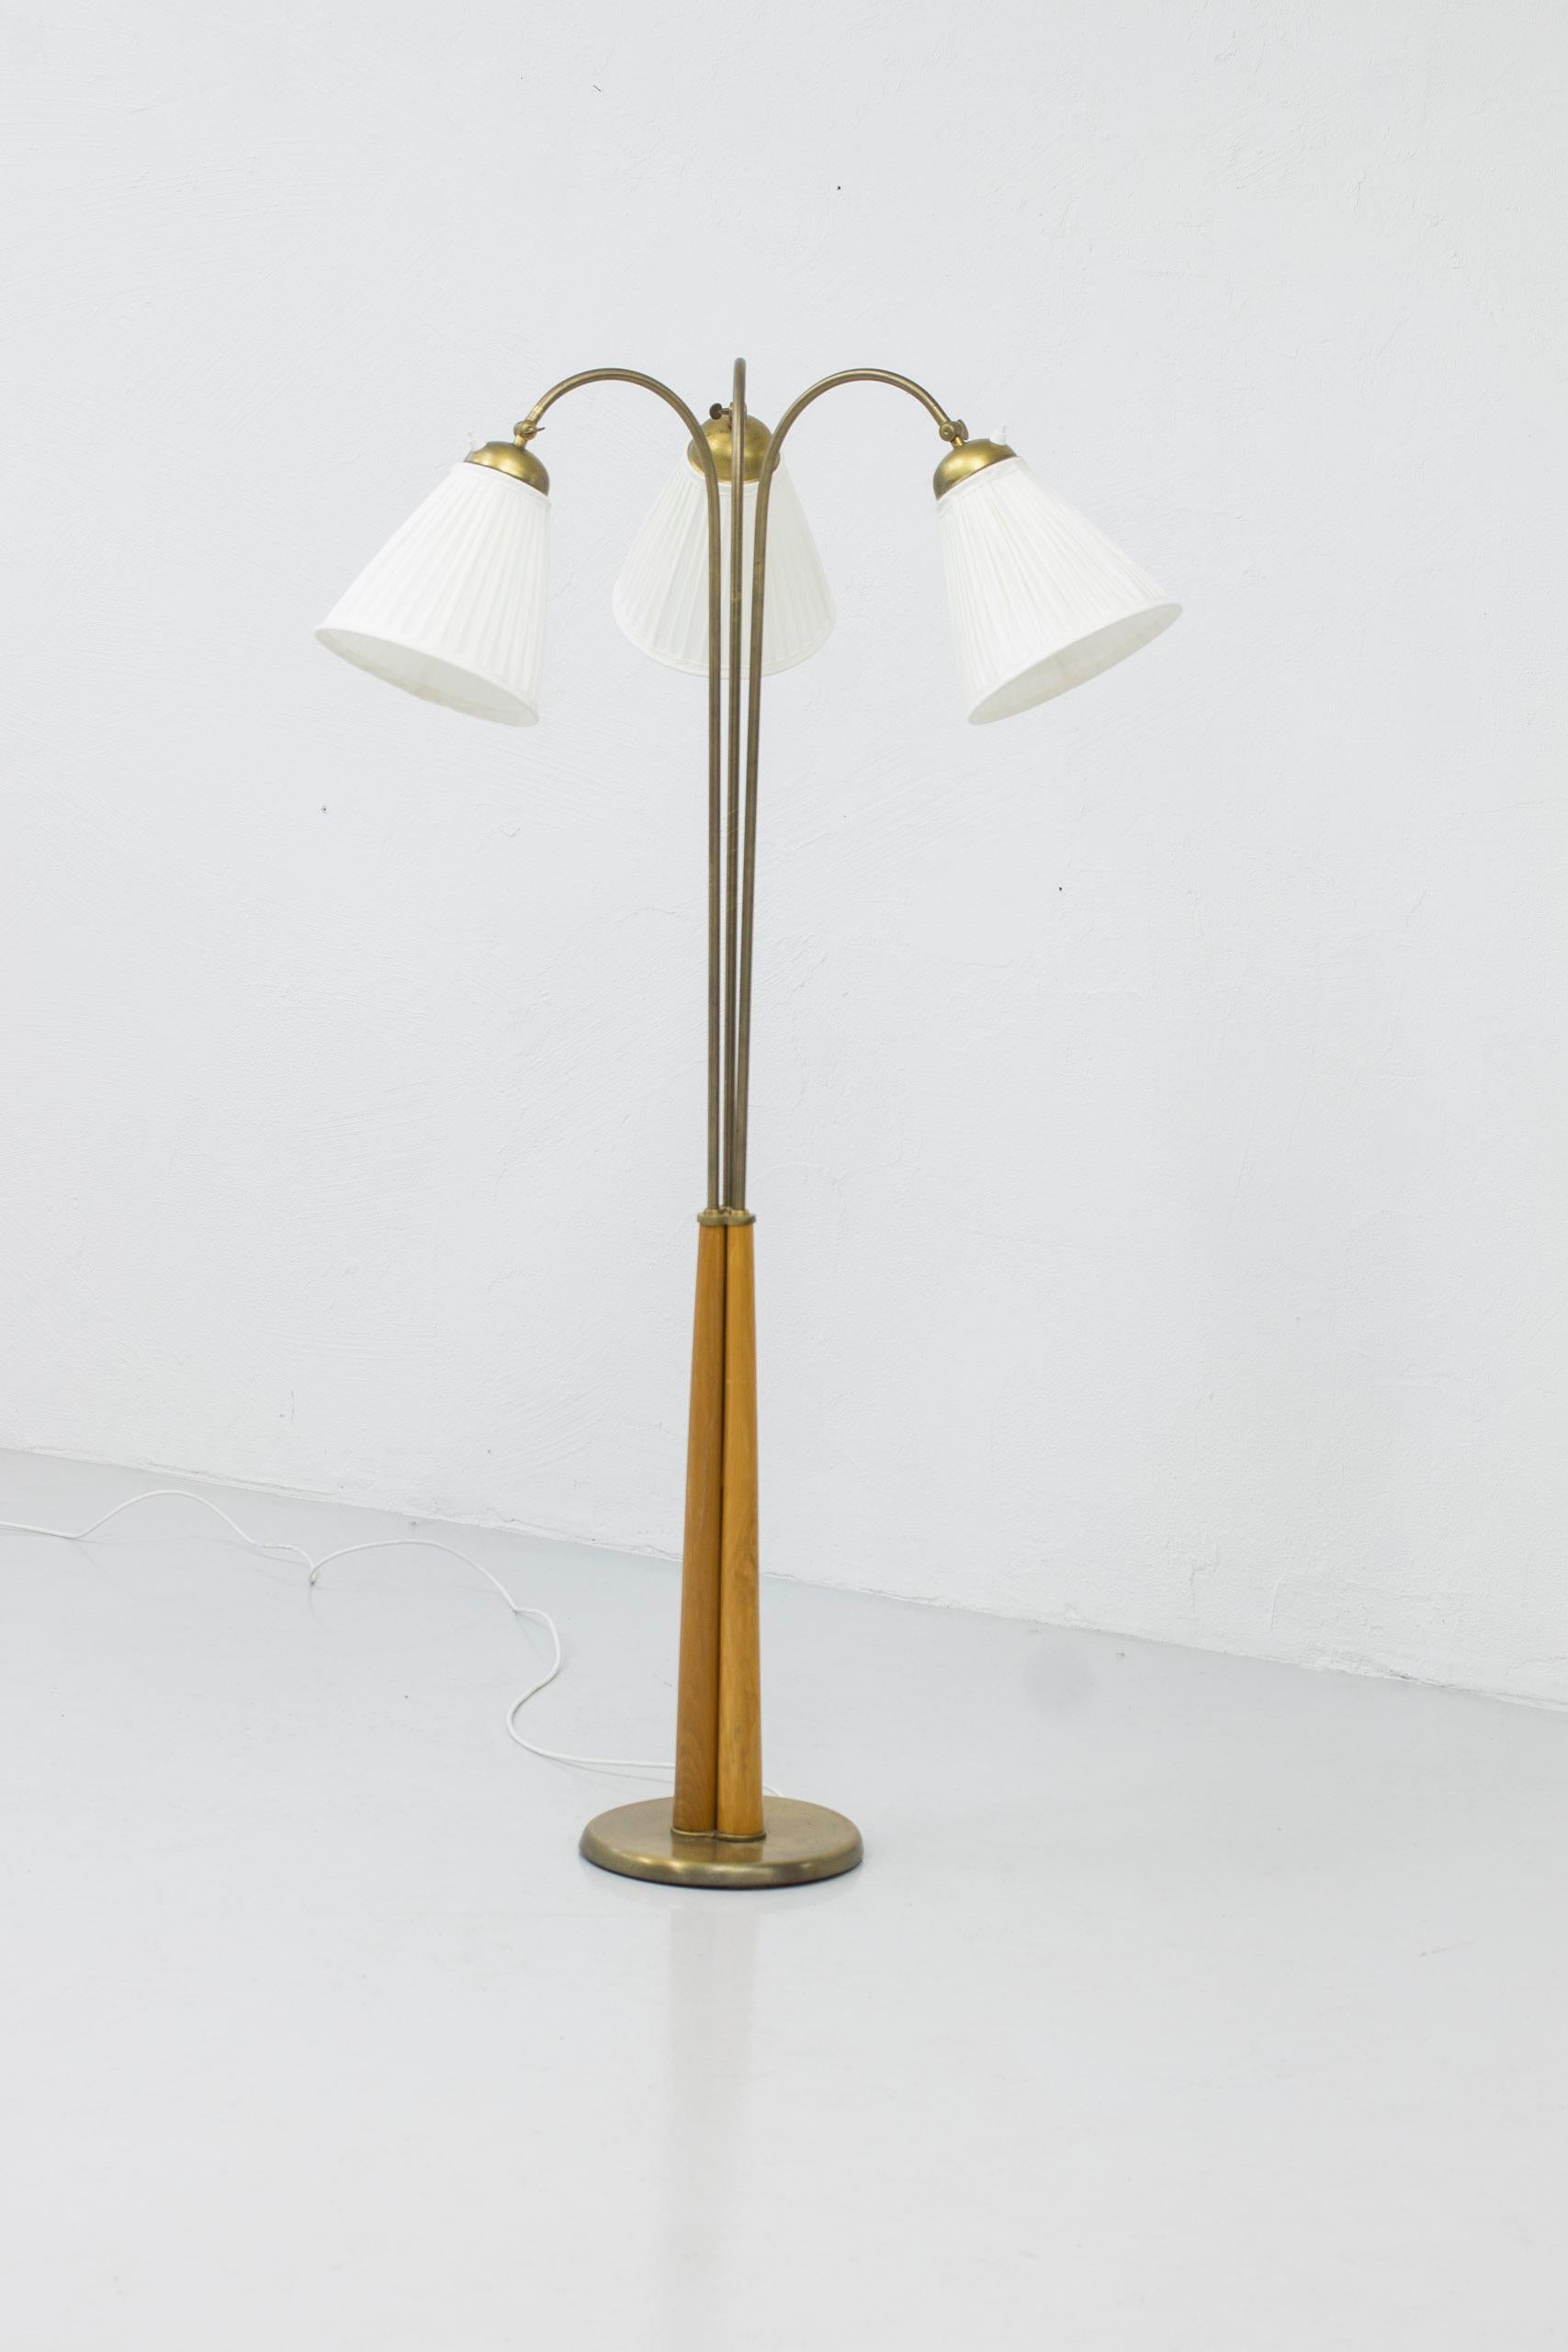 Swedish modern floor lamp designed and produced in Sweden around the 1940s. Made from brass with solid elm lamp stem. Three adjustable arms both in angle of the hade as well as position. Light switches on all lamp shades in working order. Very good